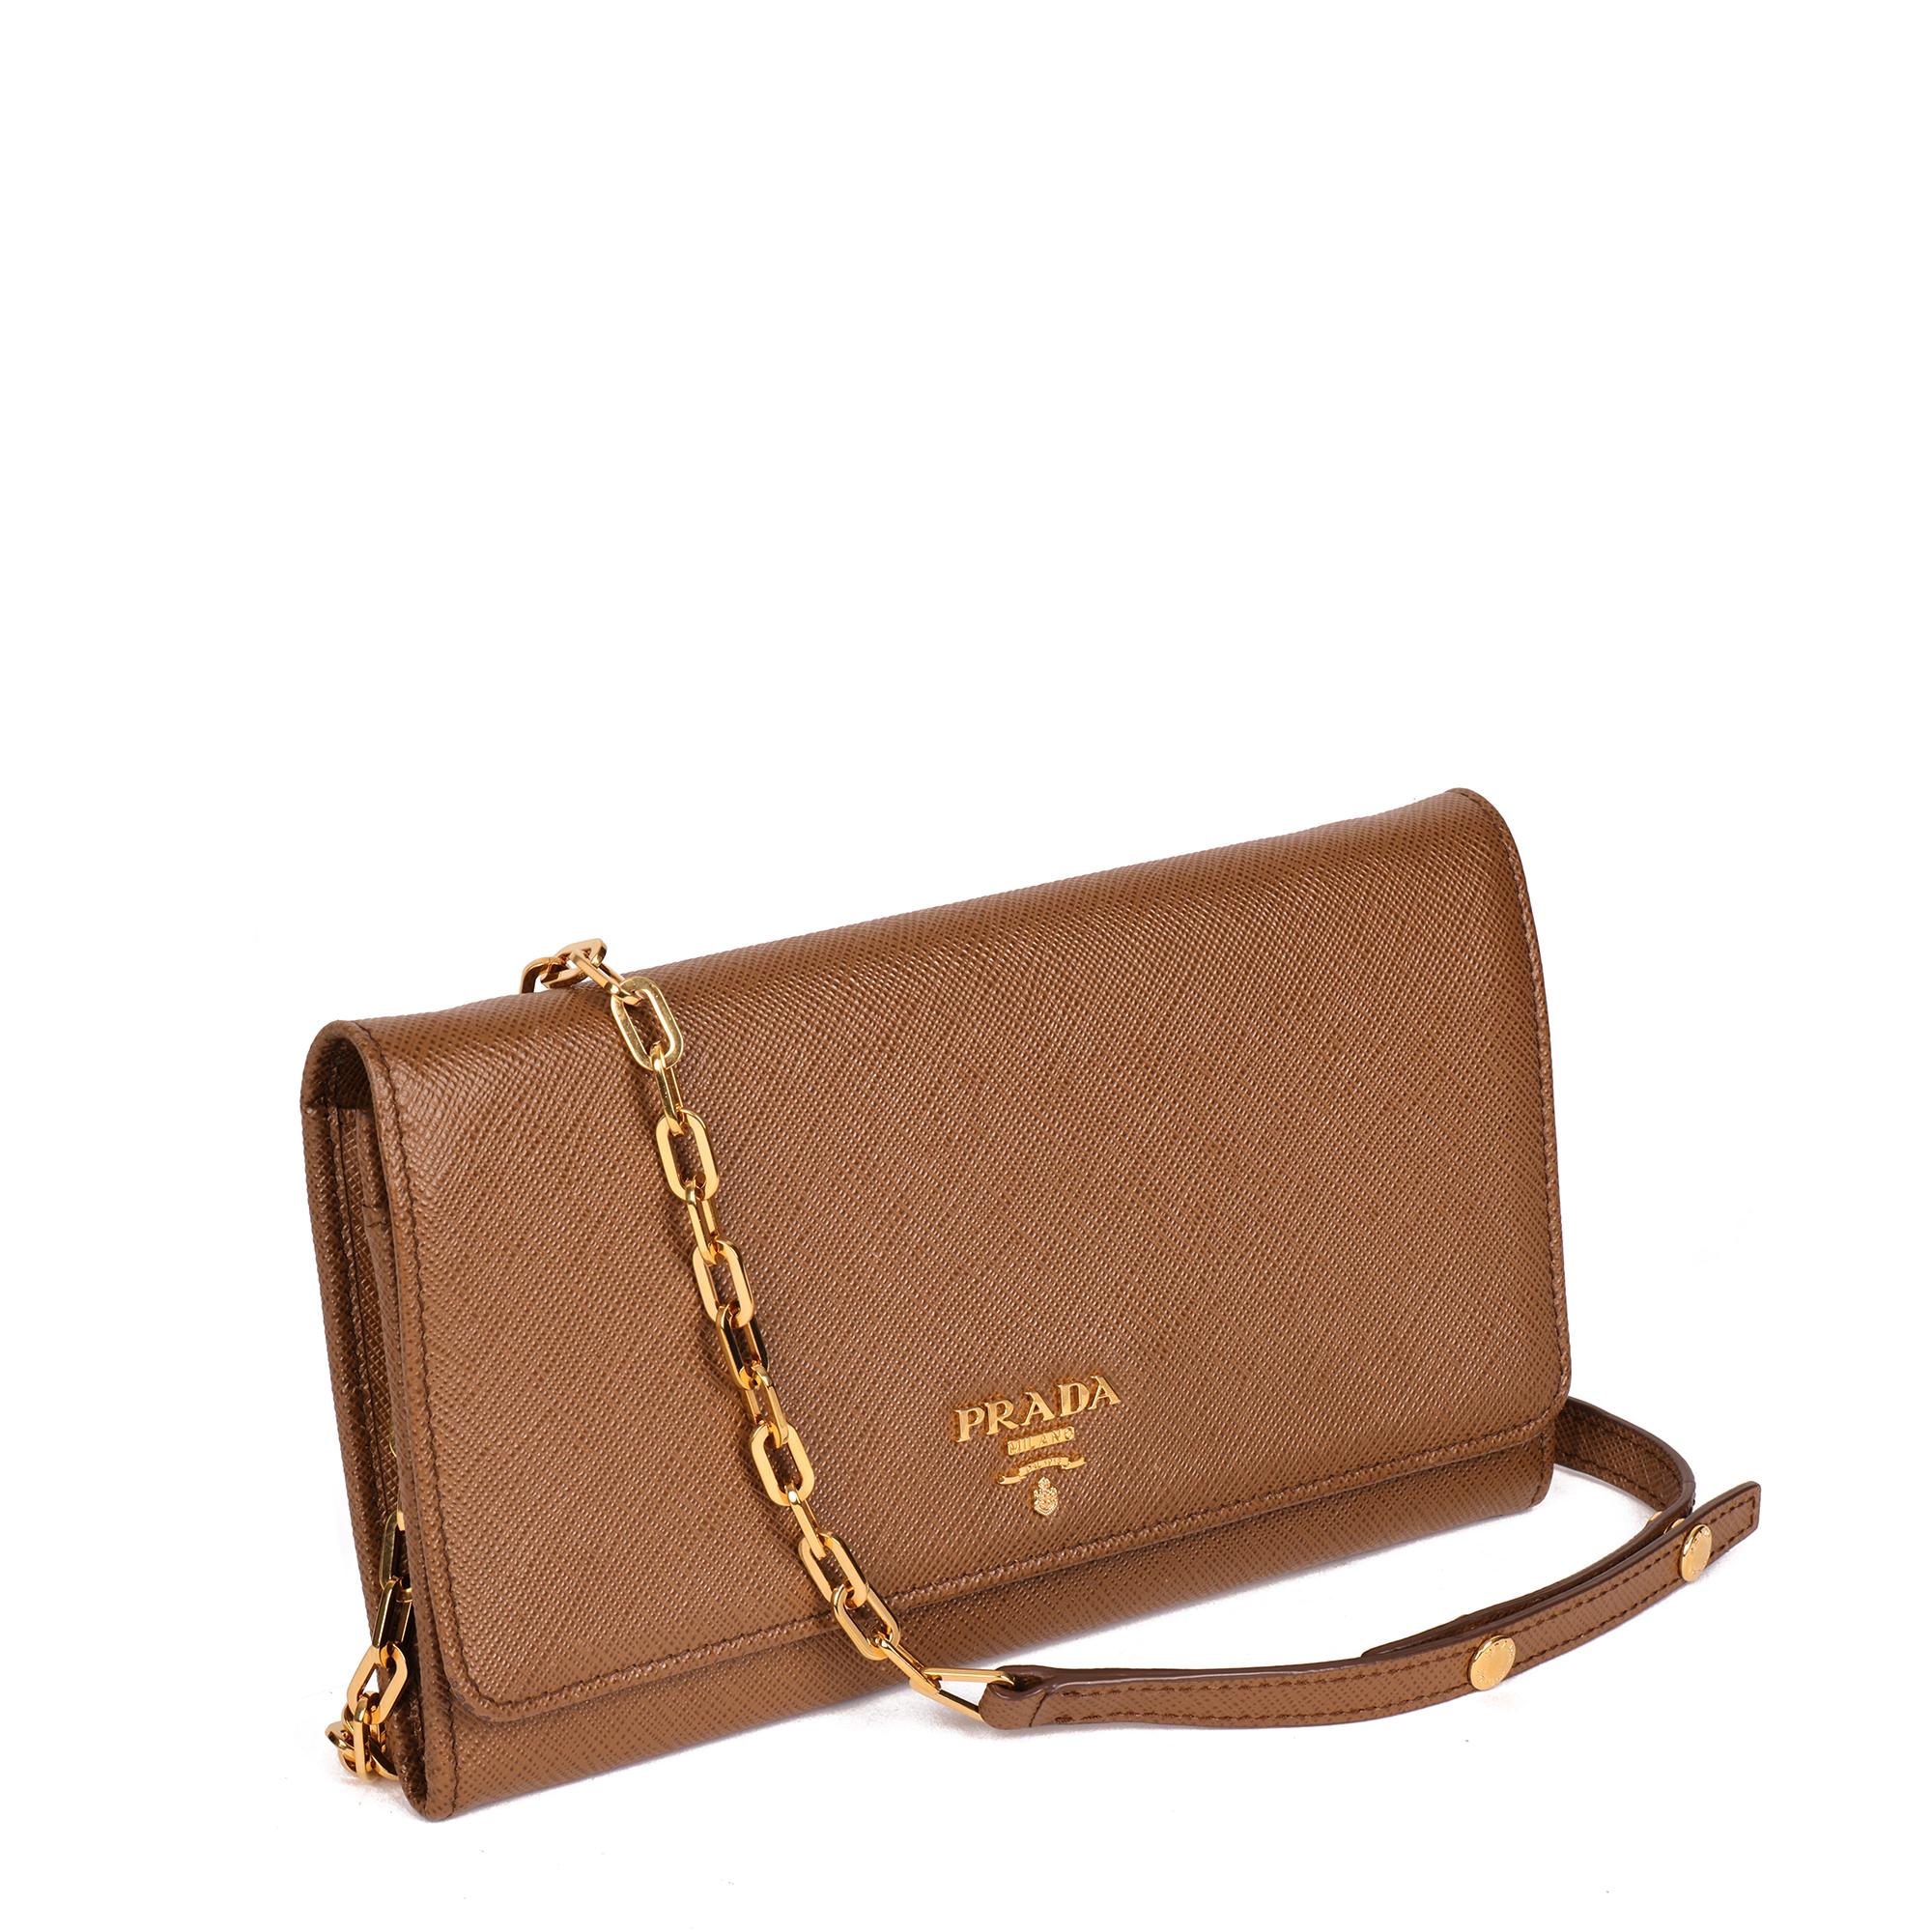 PRADA
Cannella Brown Saffiano Leather Wallet-on-Chain WOC

Xupes Reference: CB596
Serial Number: 236
Age (Circa): 2017
Accompanied By: Prada Dust Bag, Authenticity Card
Authenticity Details: Date Stamp (Made in Italy)
Gender: Ladies
Type: Shoulder,